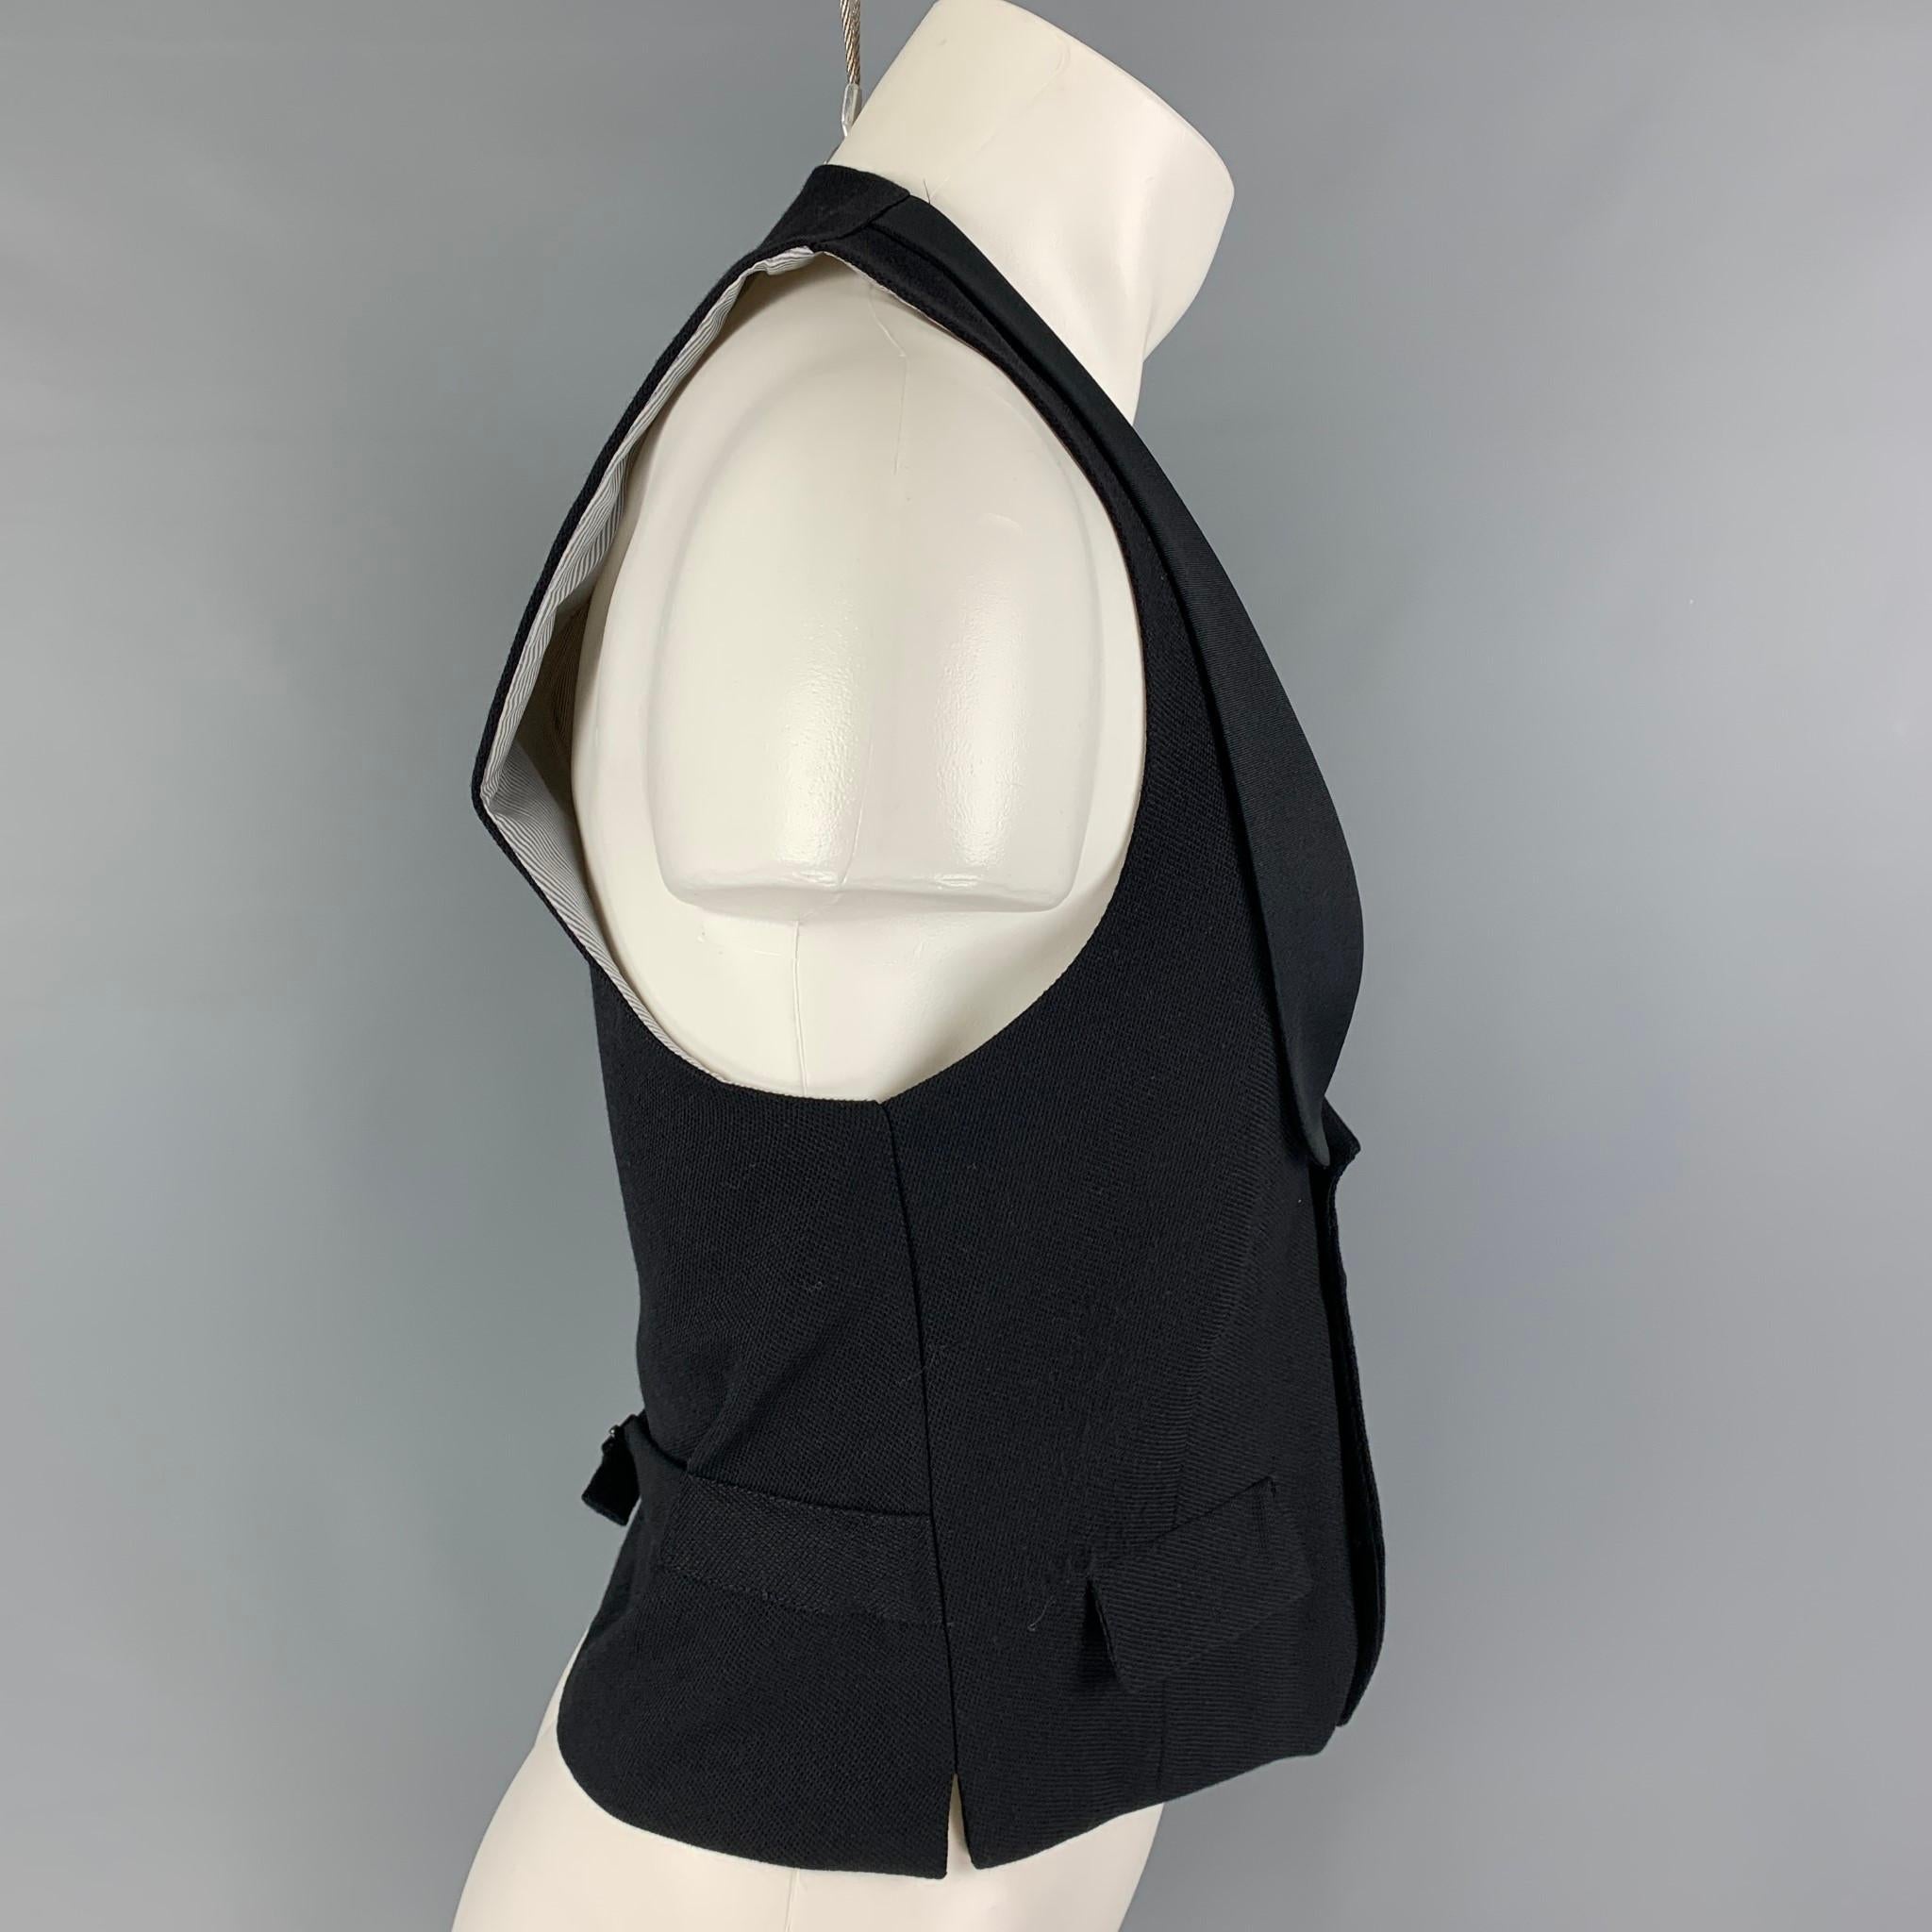 BAND OF OUTSIDERS vest comes in a black silk with a stripe lining featuring a shawl collar, flap pockets, adjustable back strap, and a buttoned closure. Made in USA. 

Excellent Pre-Owned Condition.
Marked: 2

Measurements:

Shoulder: 11 in.
Chest: